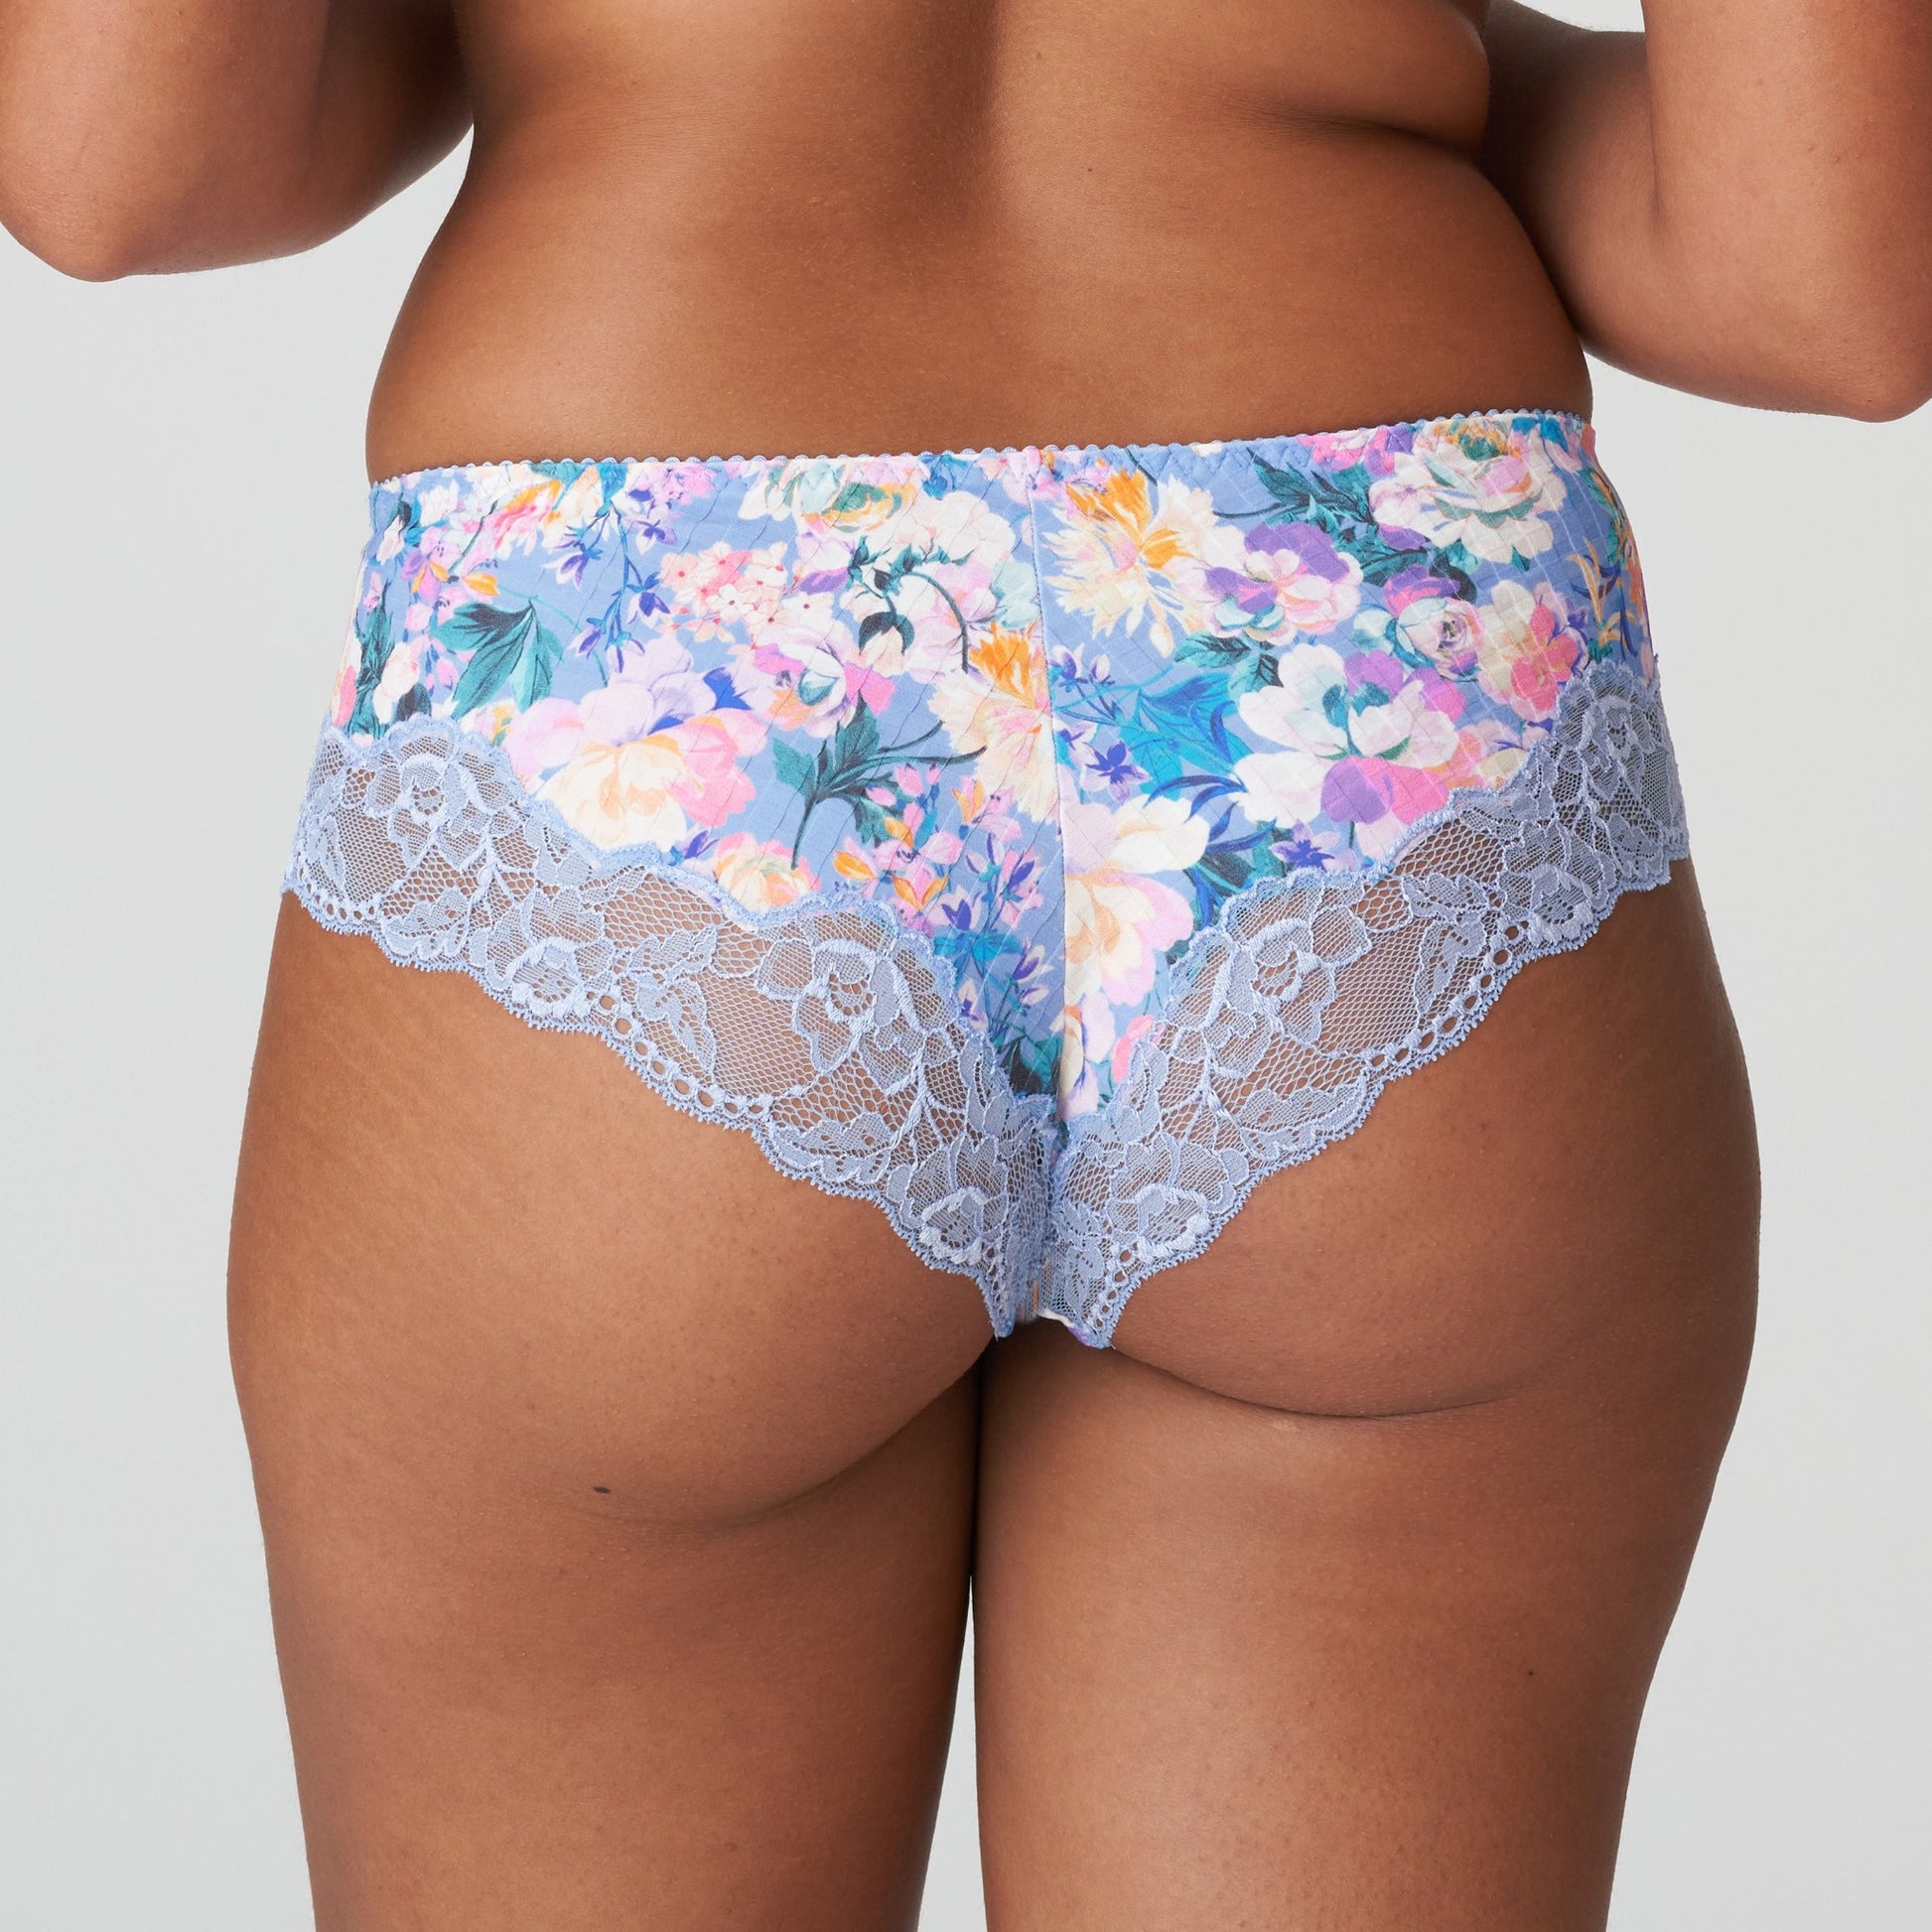 Back view of a woman wearing the Madison cheeky cut panty with lace inserts by Primadonna.